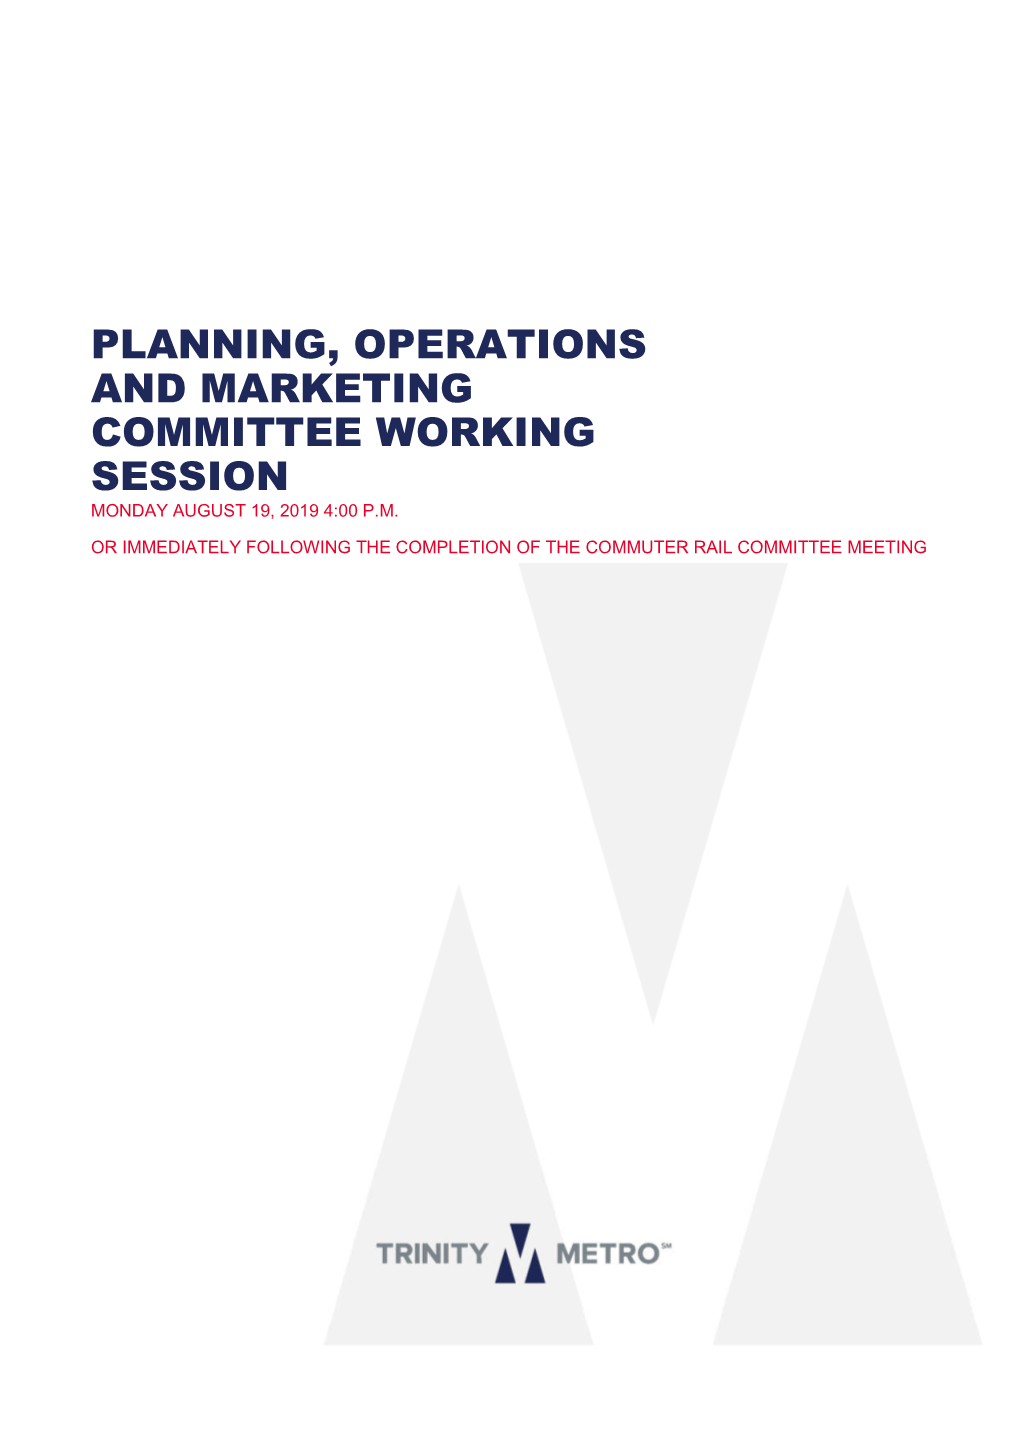 Planning, Operations and Marketing Committee Working Session Monday August 19, 2019 4:00 P.M